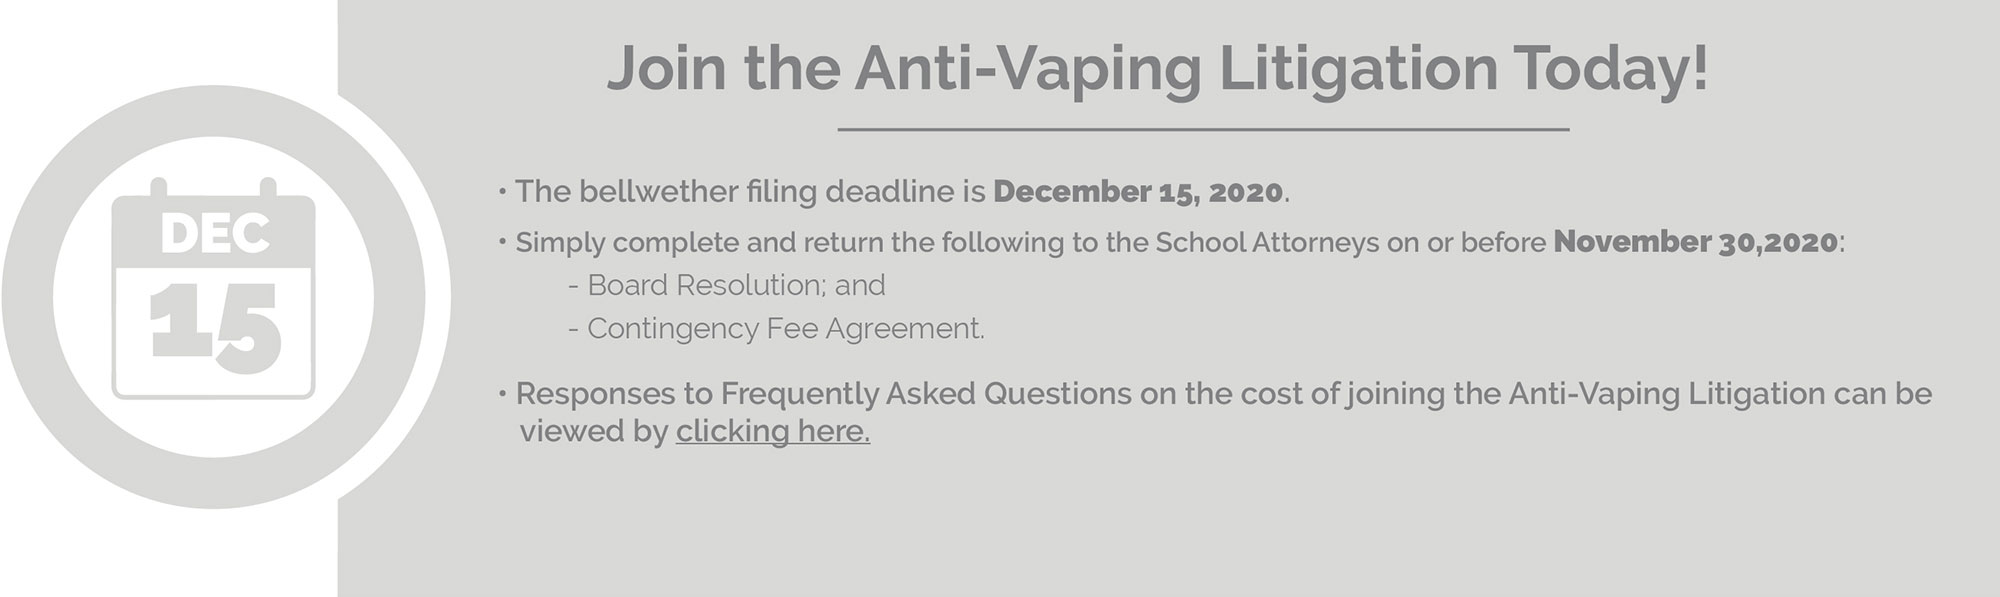 Join the Anti-Vaping litigation today